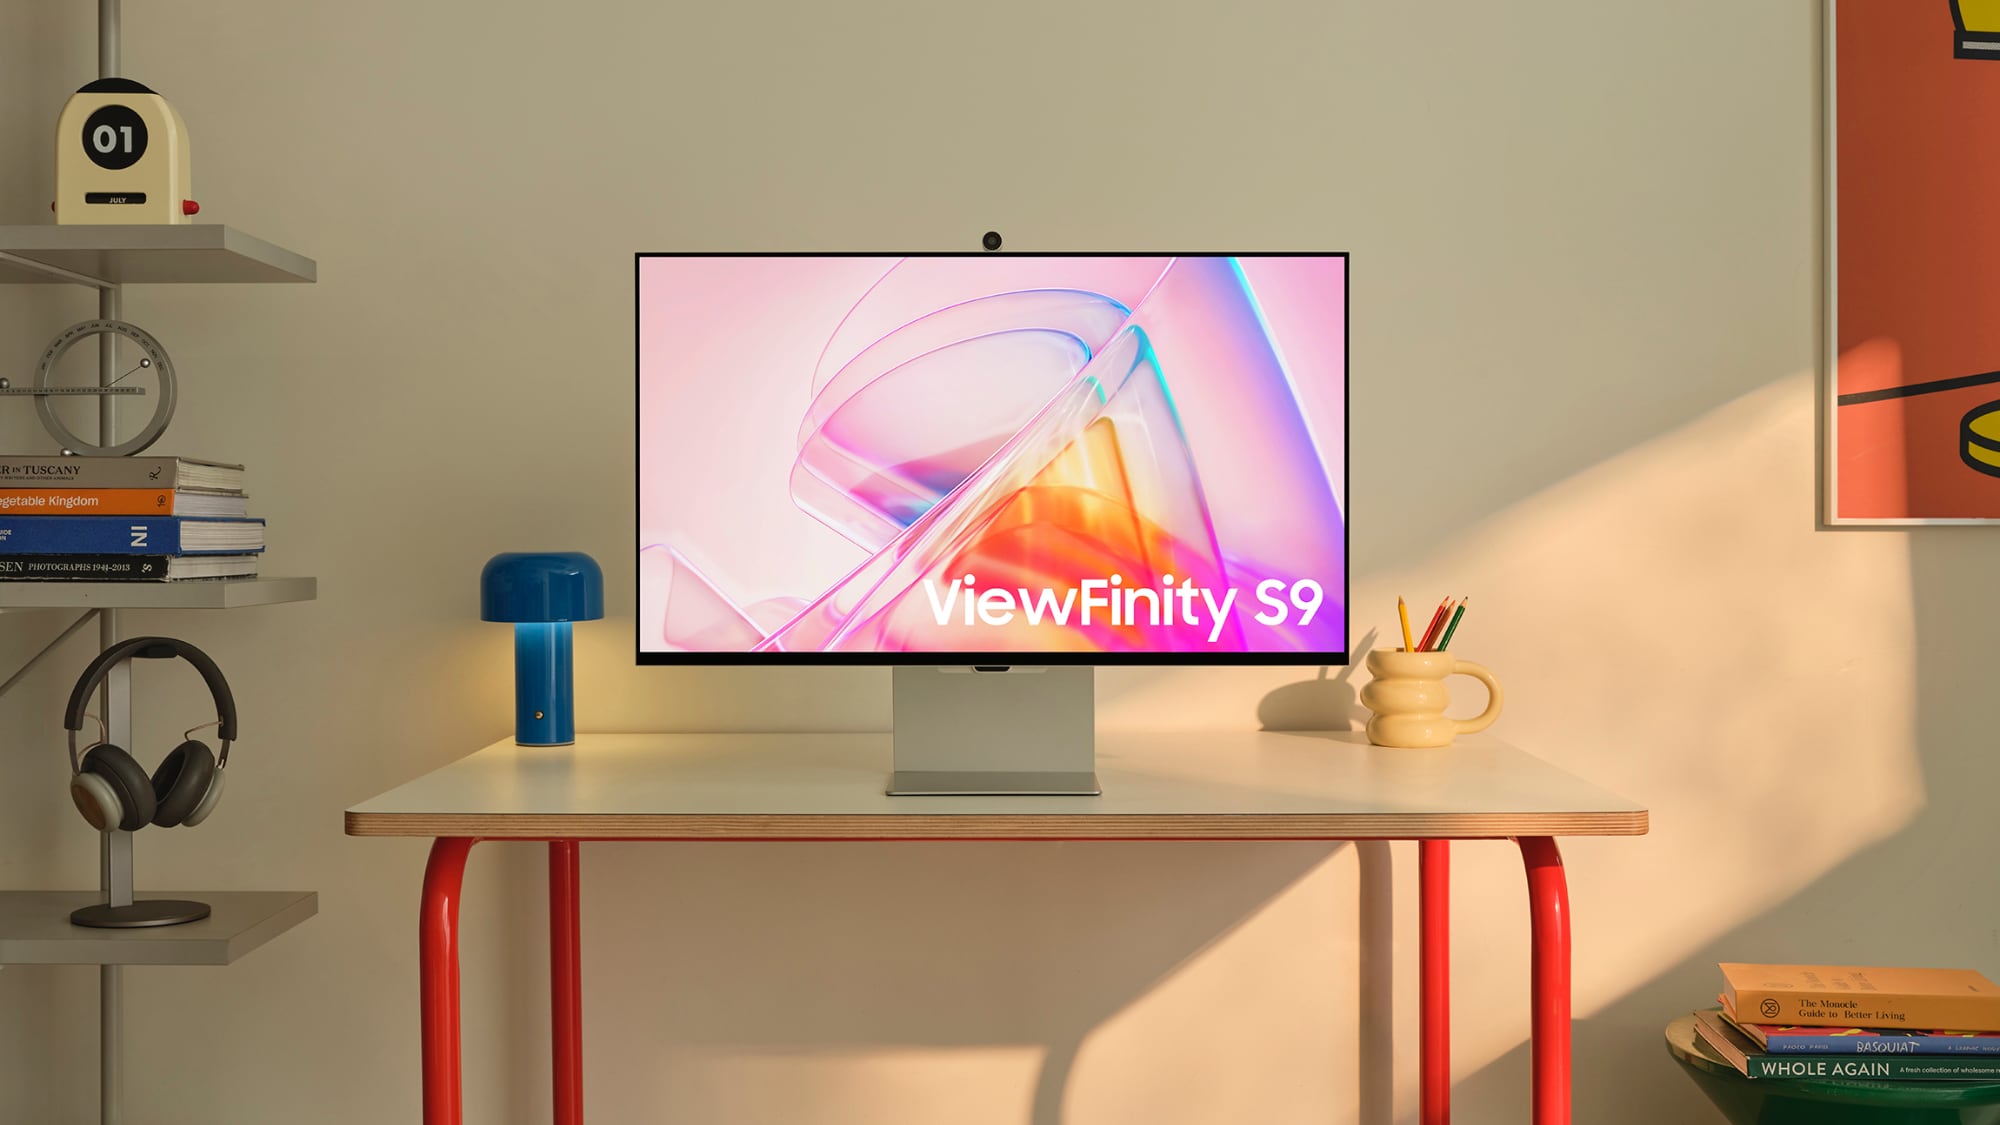 Samsung's ViewFinity S9 5K Display Launches in the U.S.